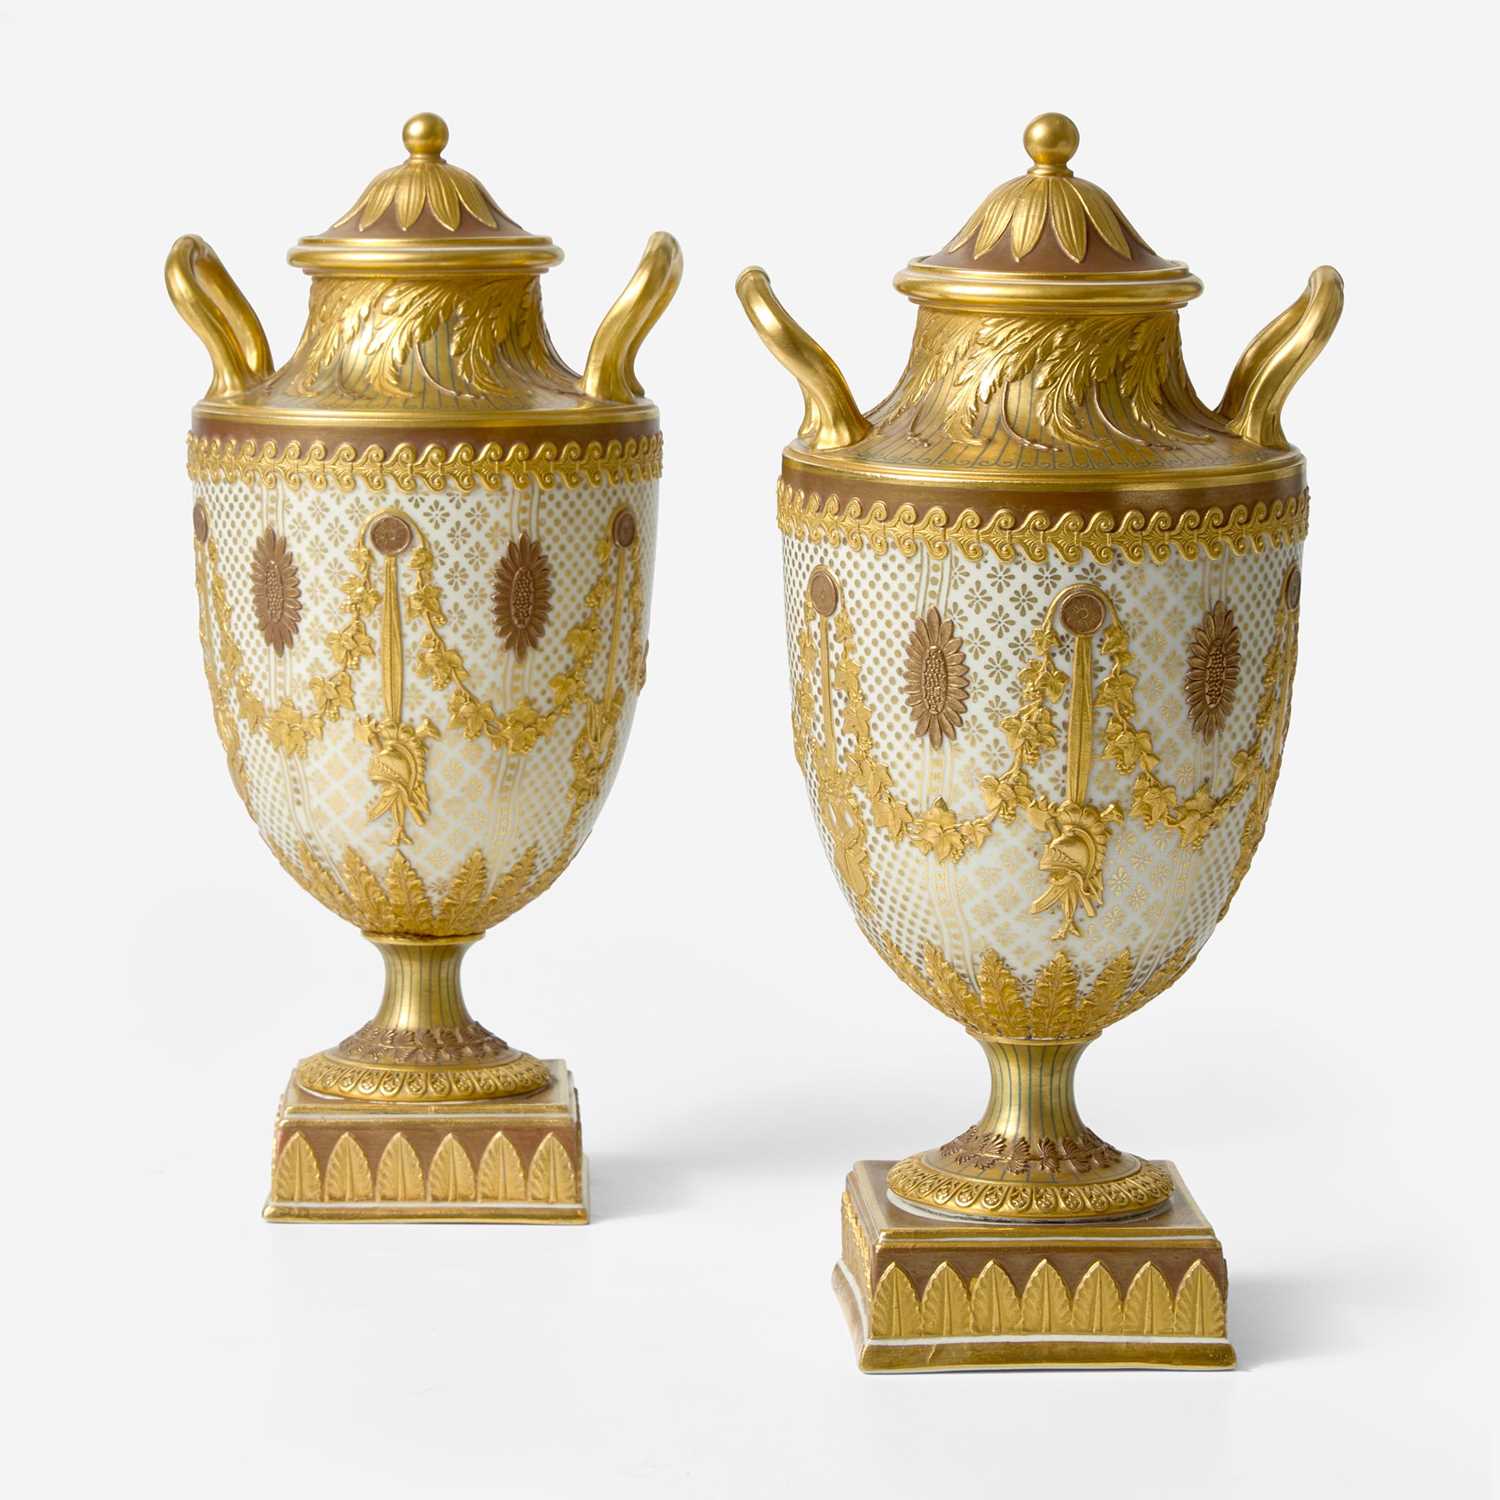 Lot 136 - A Pair of Wedgwood Gilded and Bronzed Victoria Ware Vases with Covers